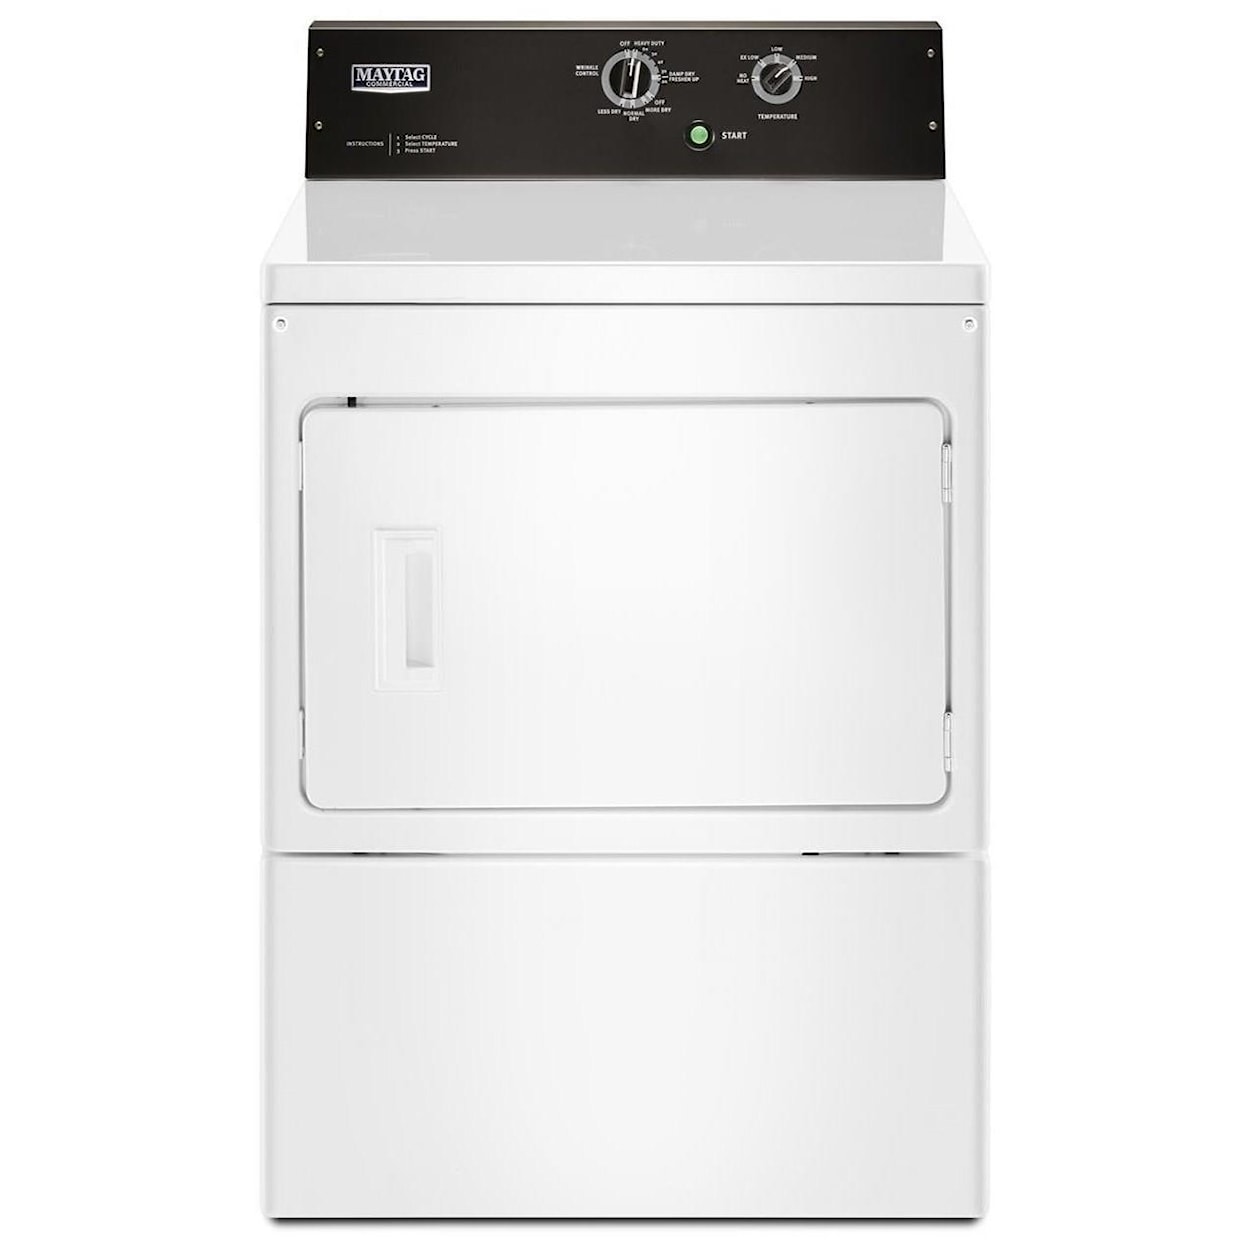 Maytag Front Load Gas Dryer 7.4 cu. ft. Commercial-Grade Dryer